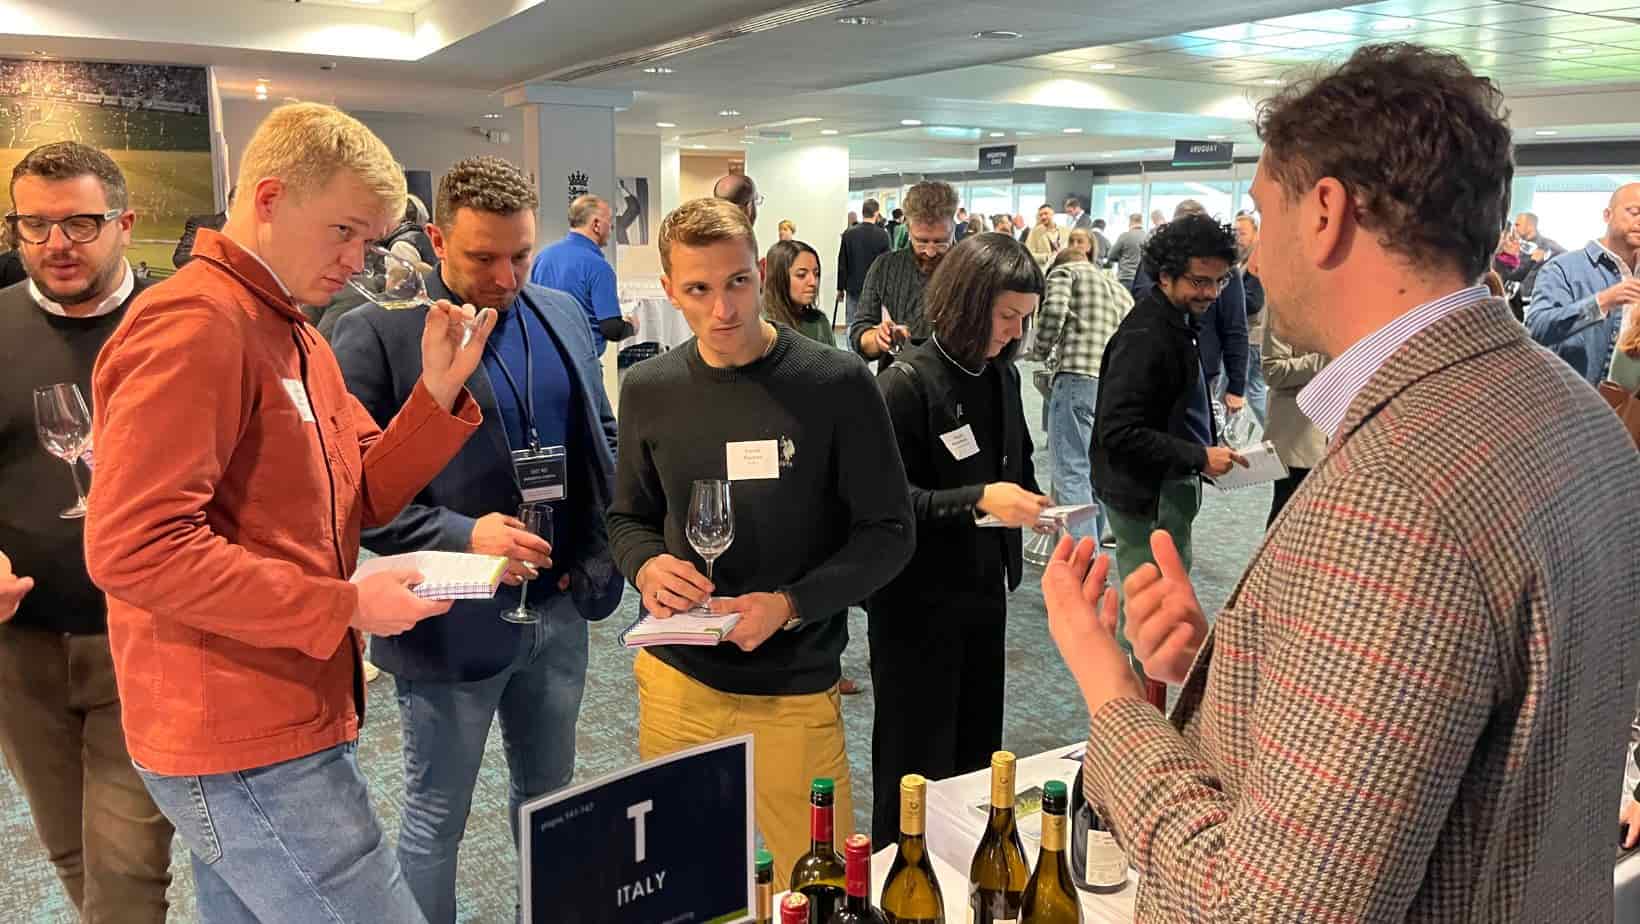 Some guests at the Portfolio tasting in London.